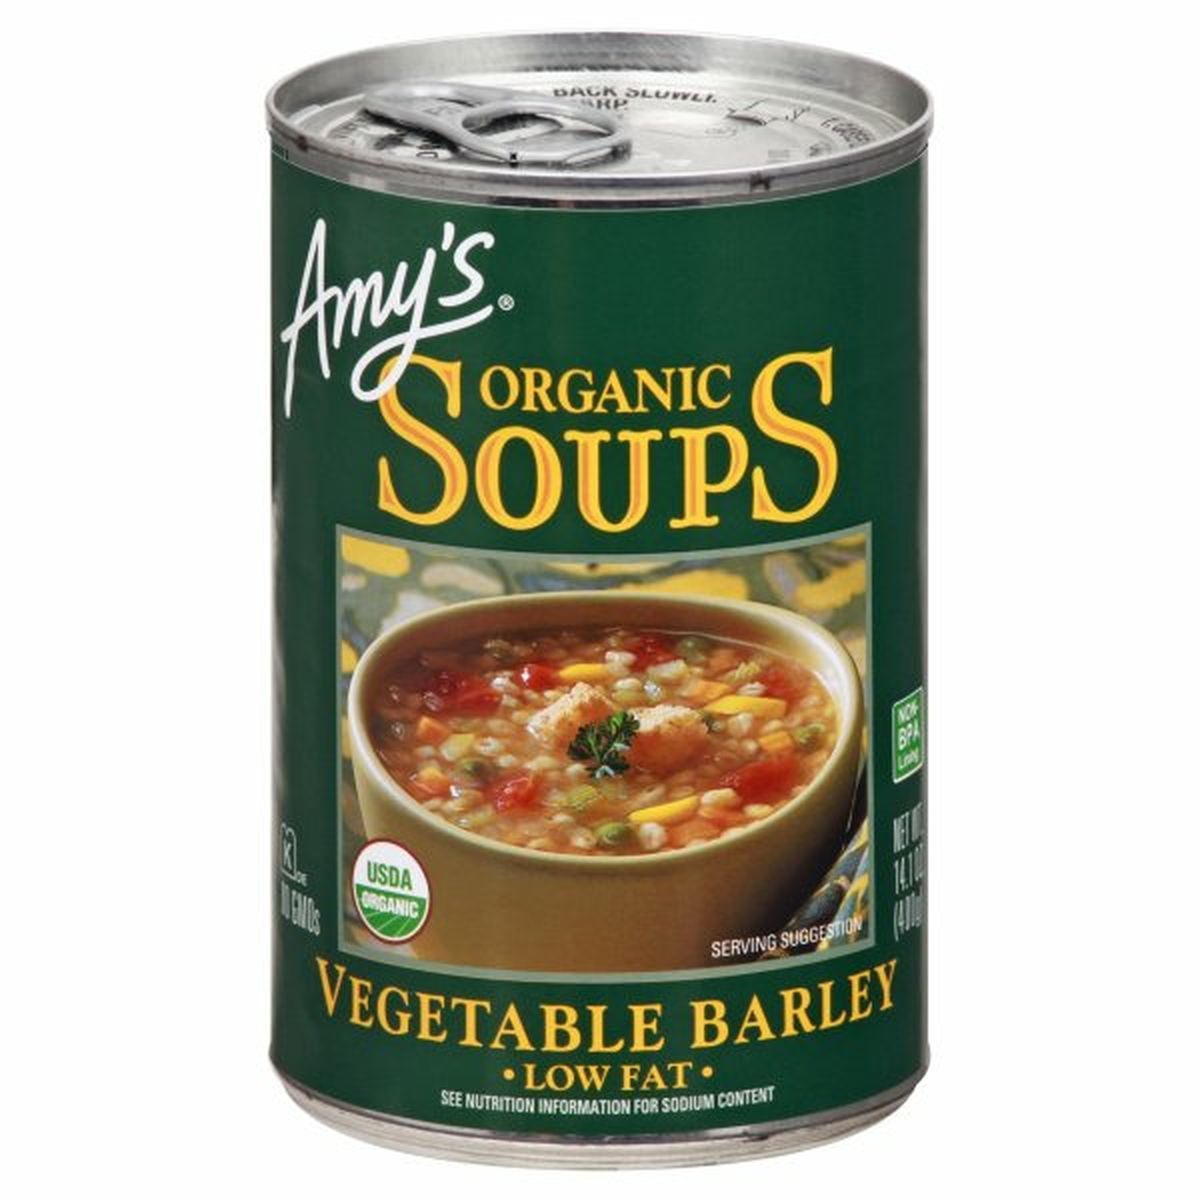 Calories in Amy's Kitchen Soups, Low Fat, Organic, Vegetable Barley